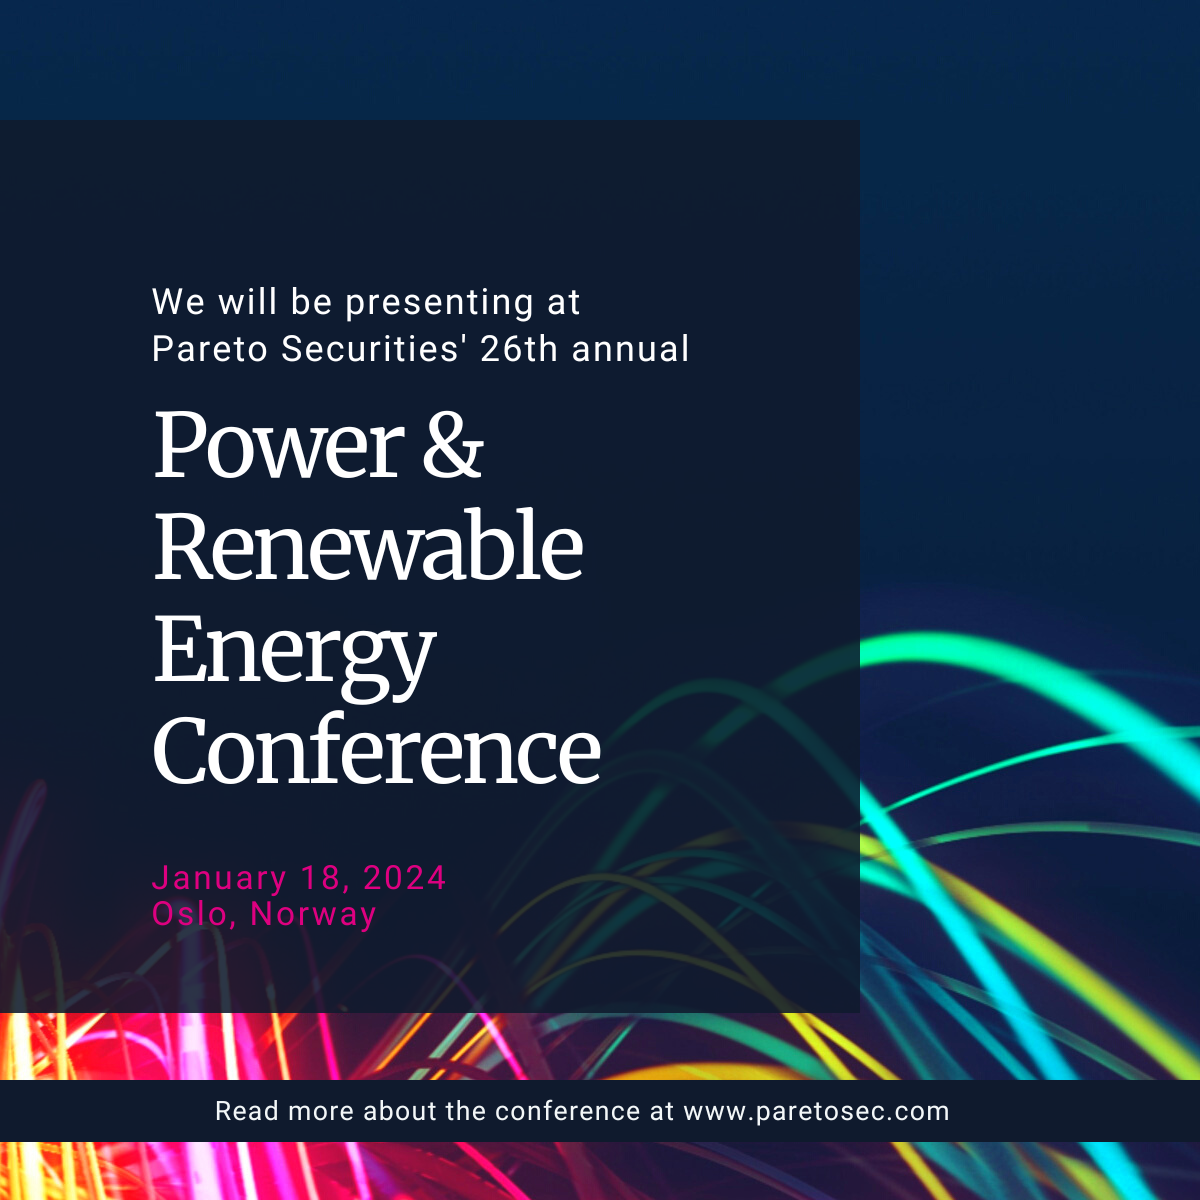 Pareto_Securities_26th_annual_Power_Renewable_Energy_Conference_1